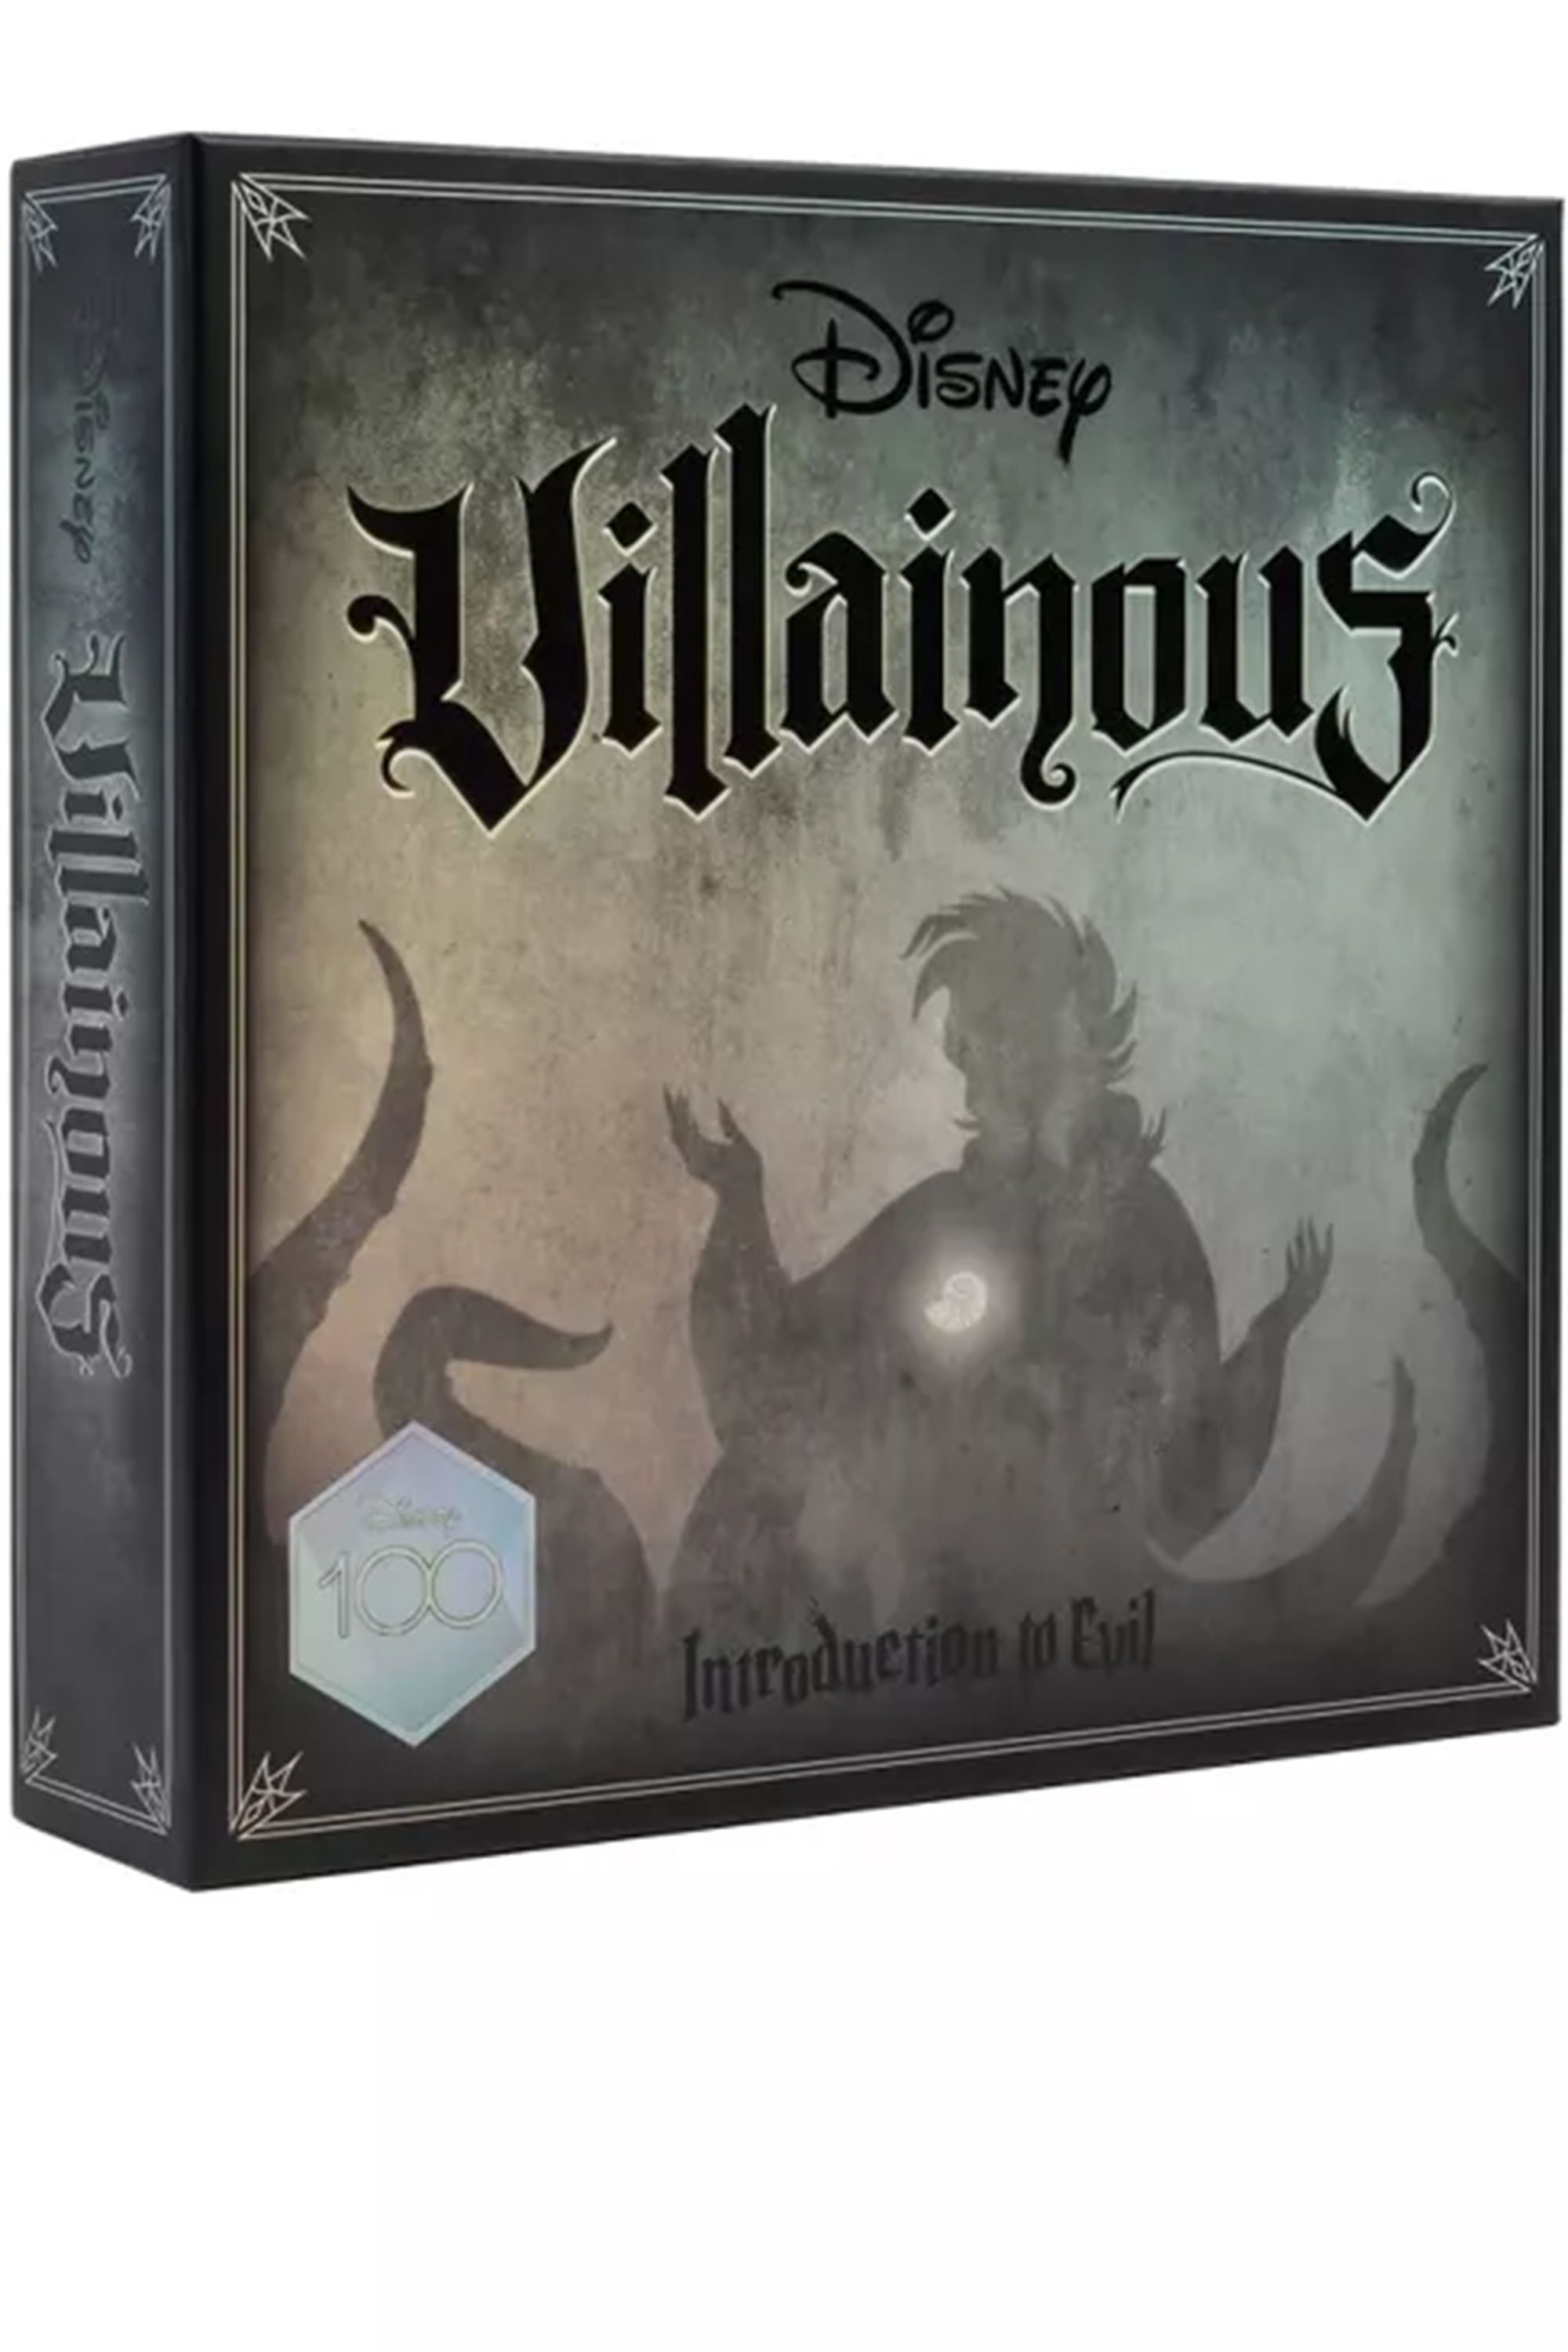 Disney Villainous: Introduction To Evil Special Edition Available For  Pre-Order Now